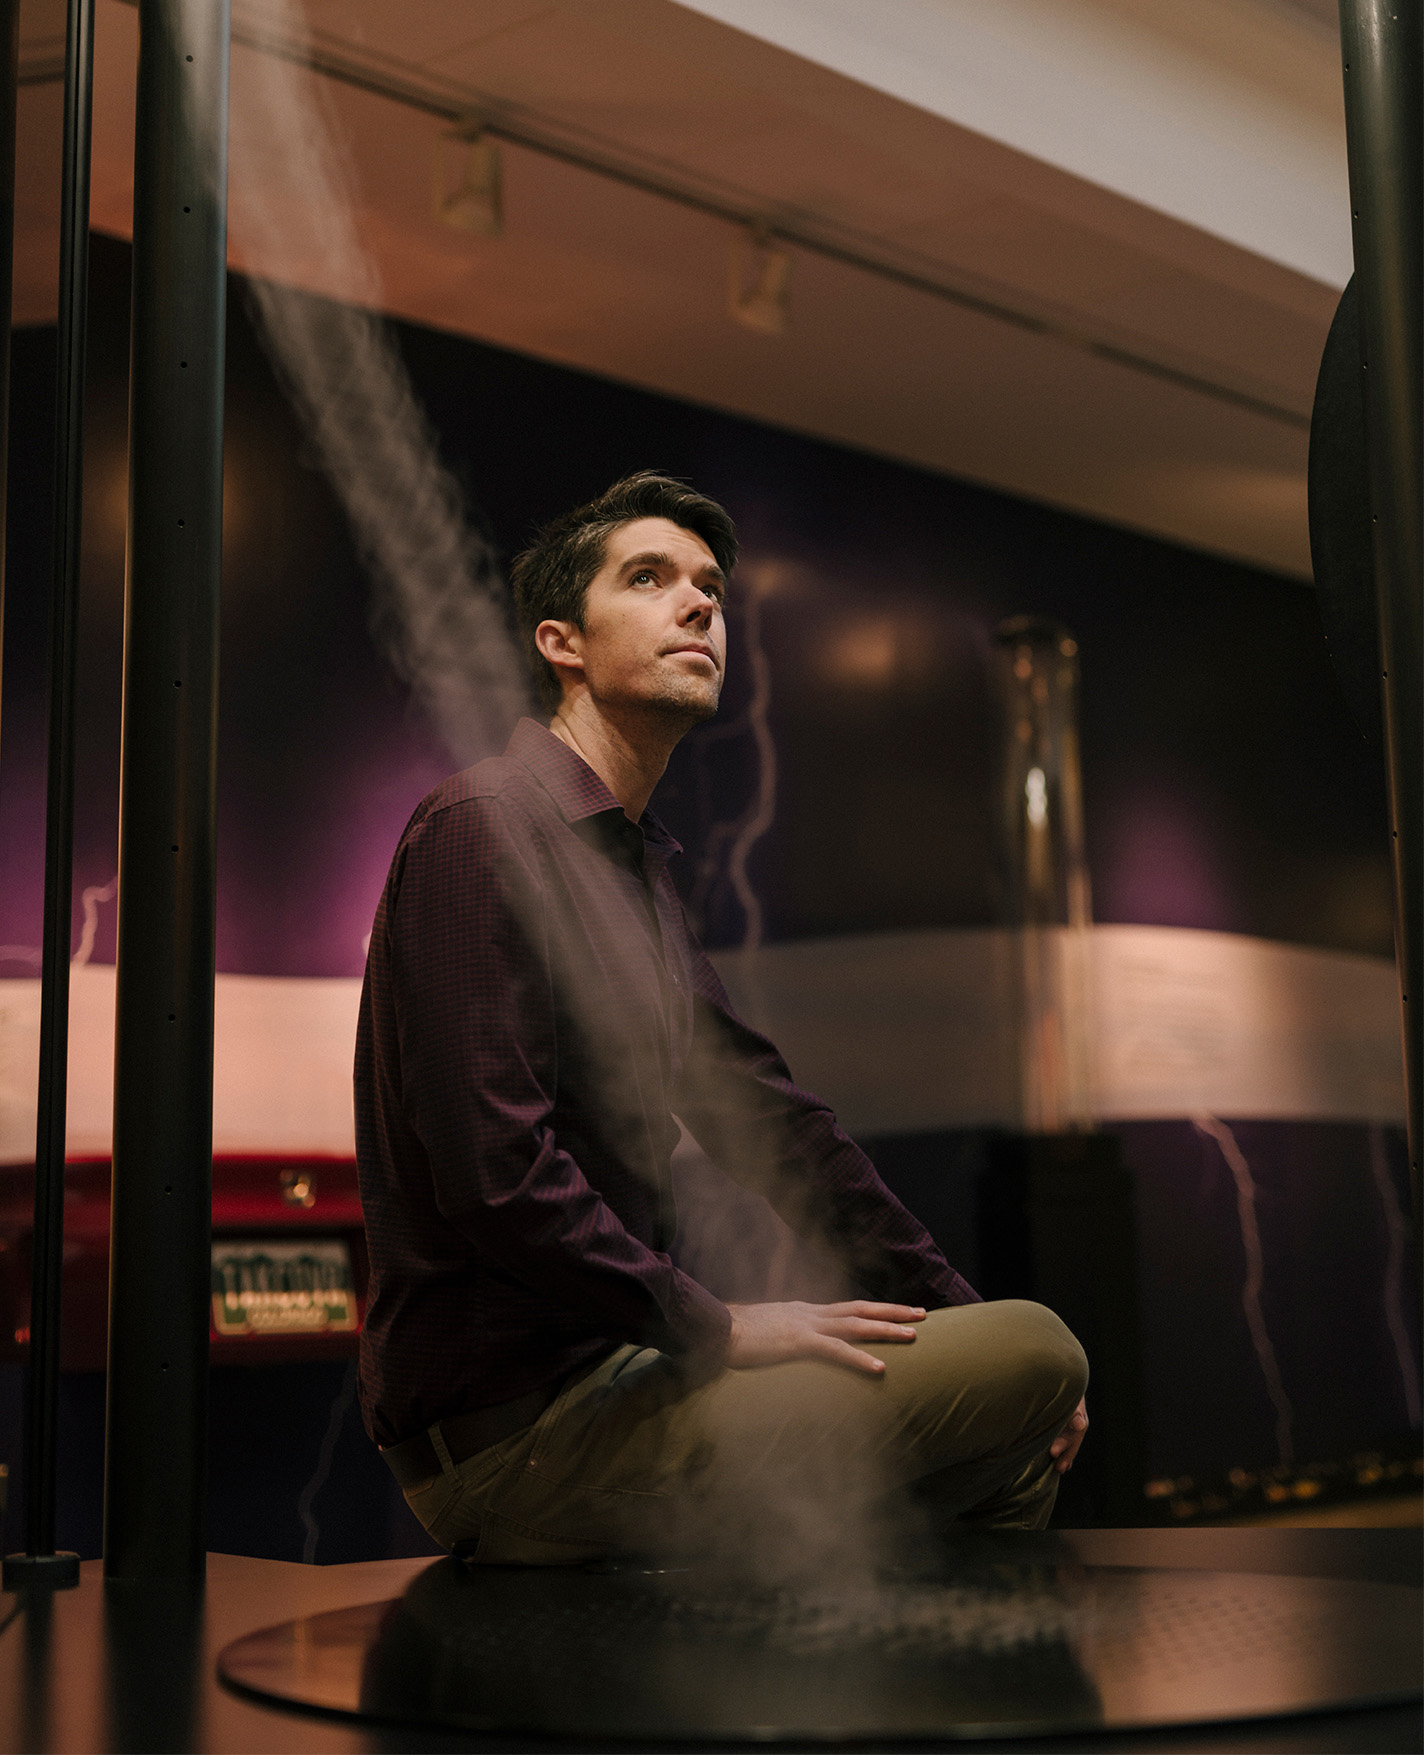 Daniel Swain sits in a darkened room, looking up to the right of the frame, with a trail of steam cutting across his shoulder.